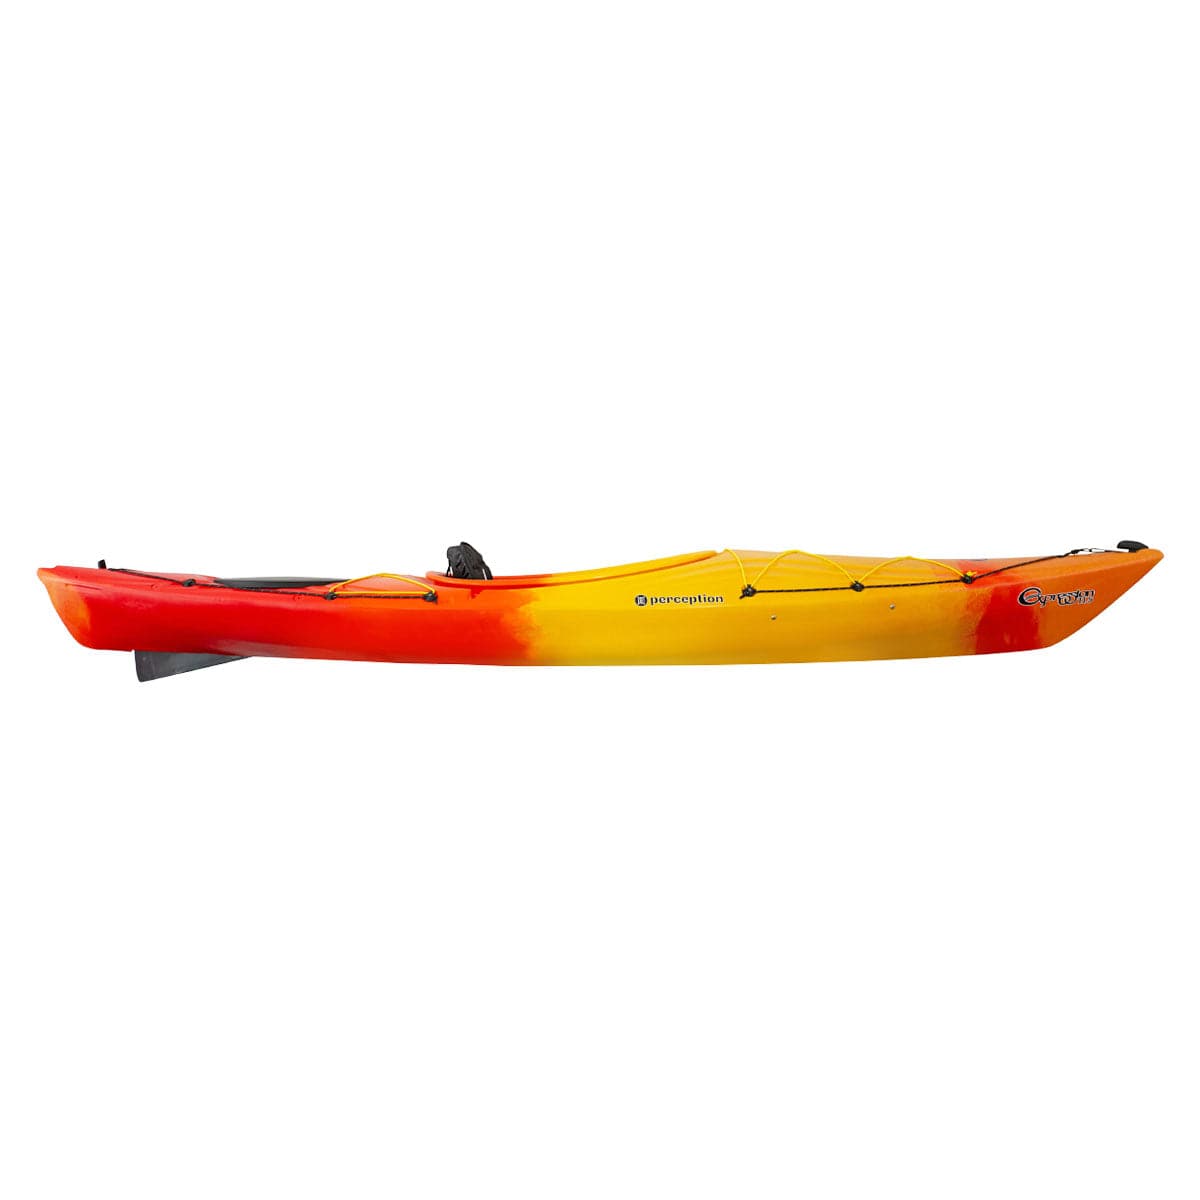 Featuring the Expression 11.5 expedition touring / sea kayak, sit-inside rec / touring kayak manufactured by Perception shown here from a fourth angle.